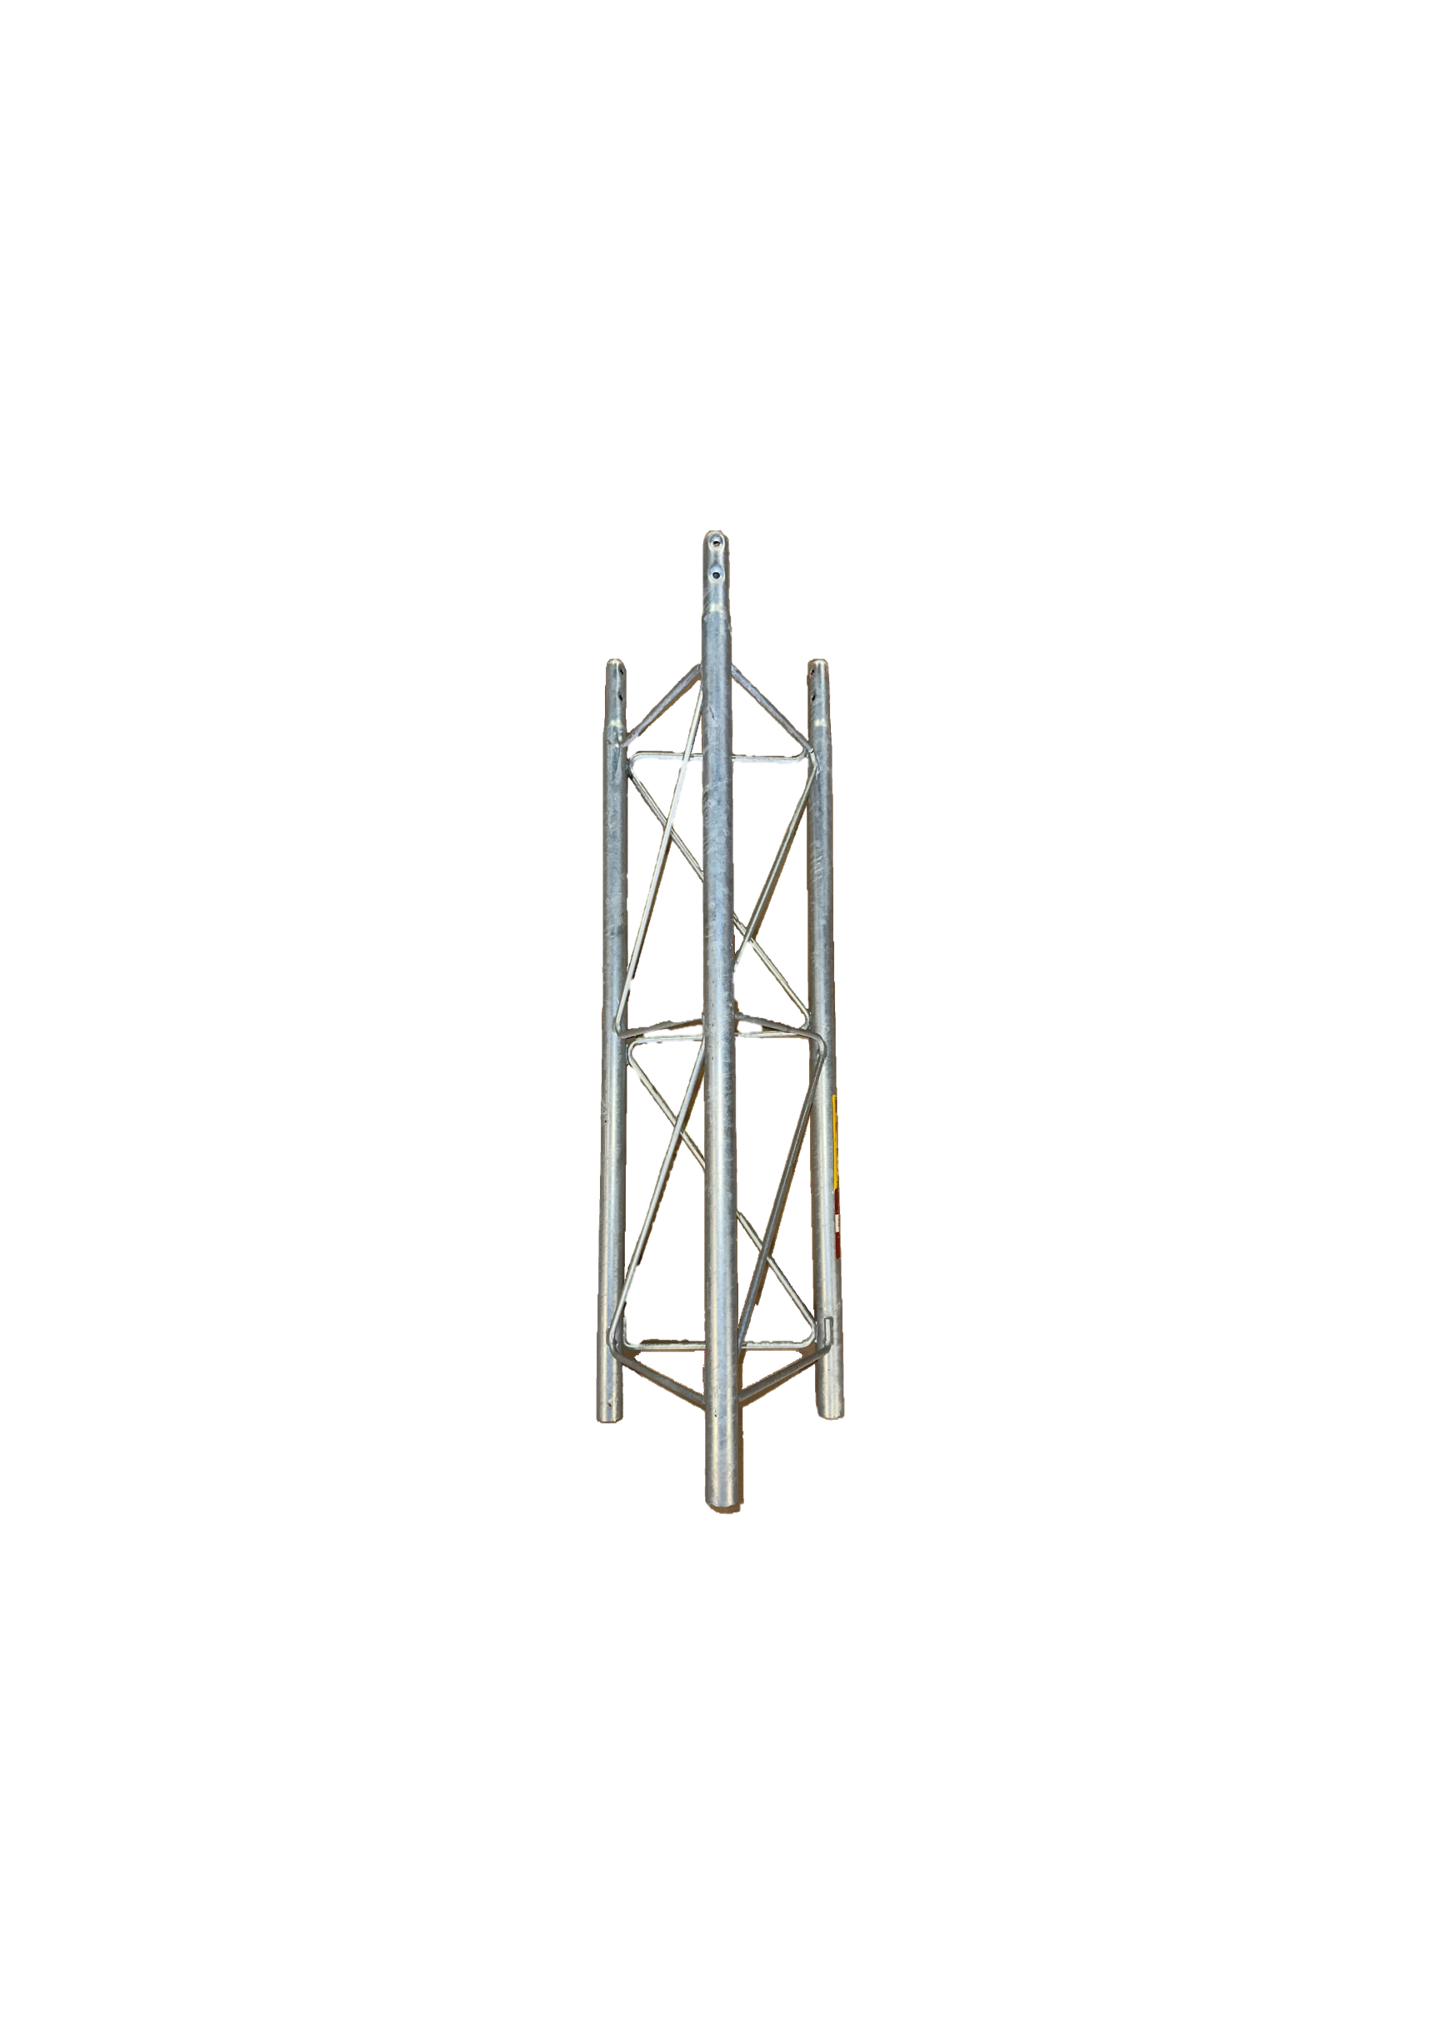 Amerite 25 Series 3 foot Tower Base Section